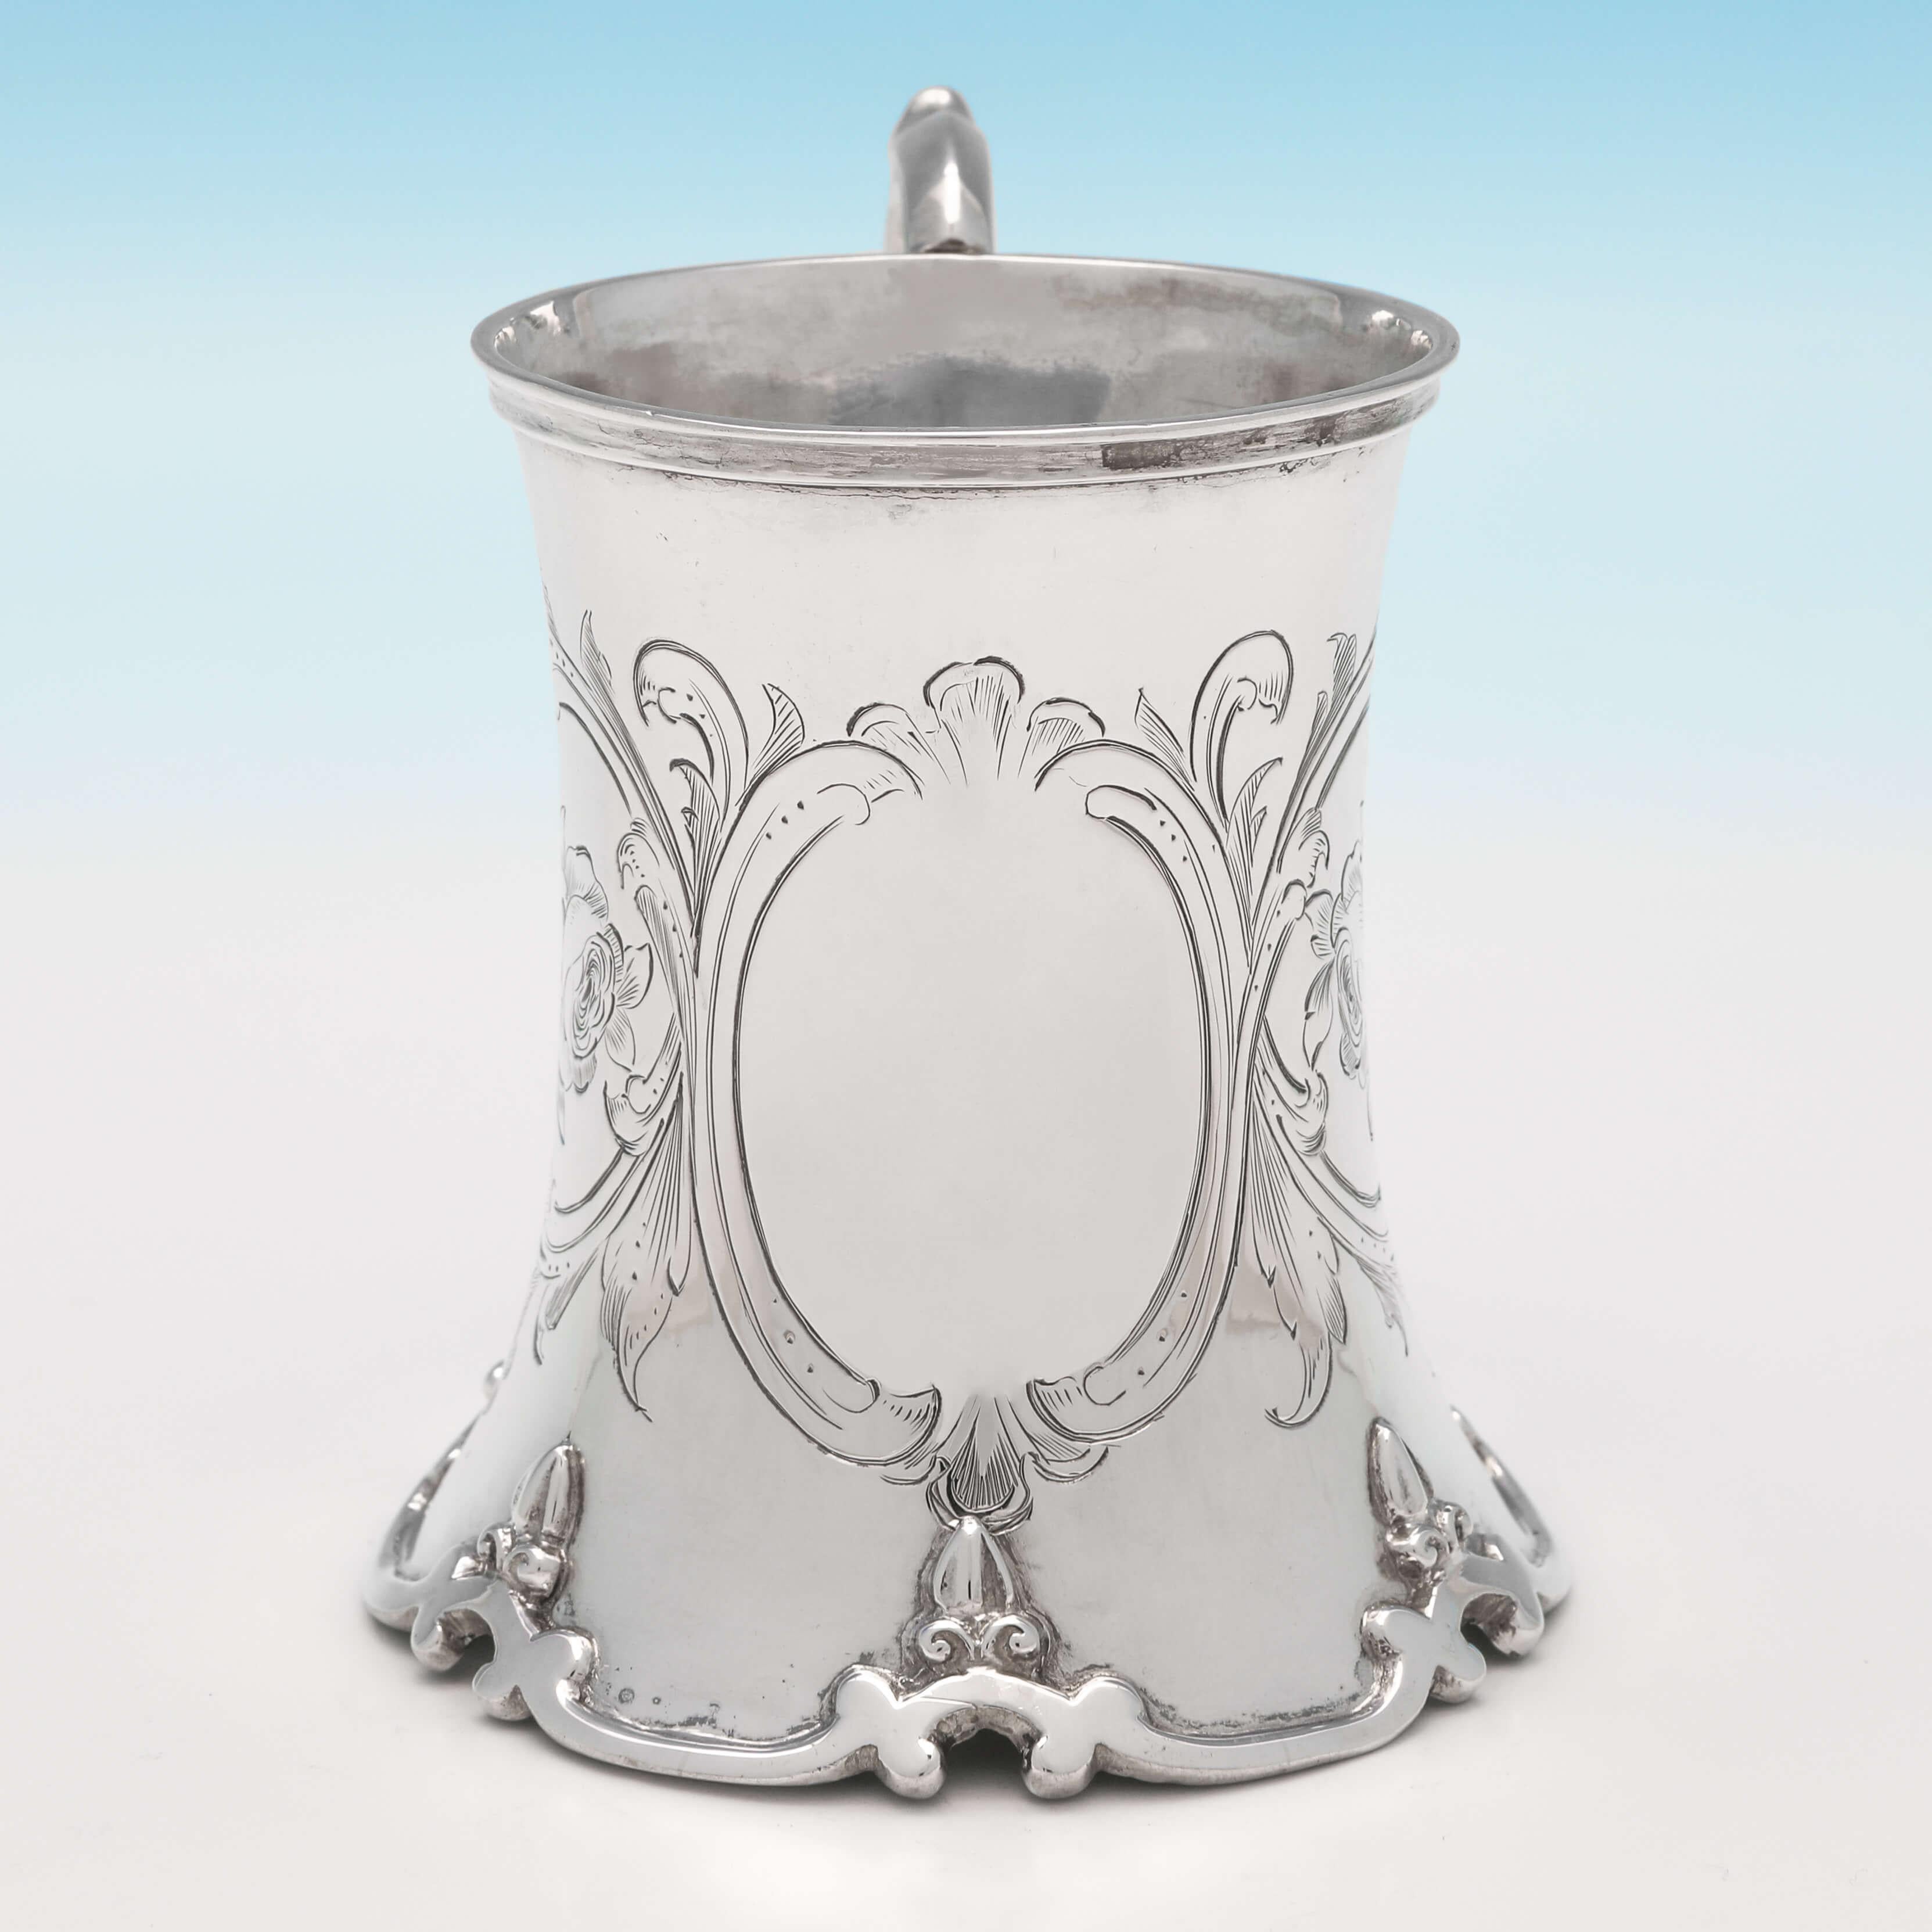 Hallmarked in London in 1852 by Robert Hennell IV, this elegant, Victorian, antique sterling silver Christening mug, has concave shaping with a scroll base, engraved decoration, a scroll handle and a gilt interior. The christening mug measures